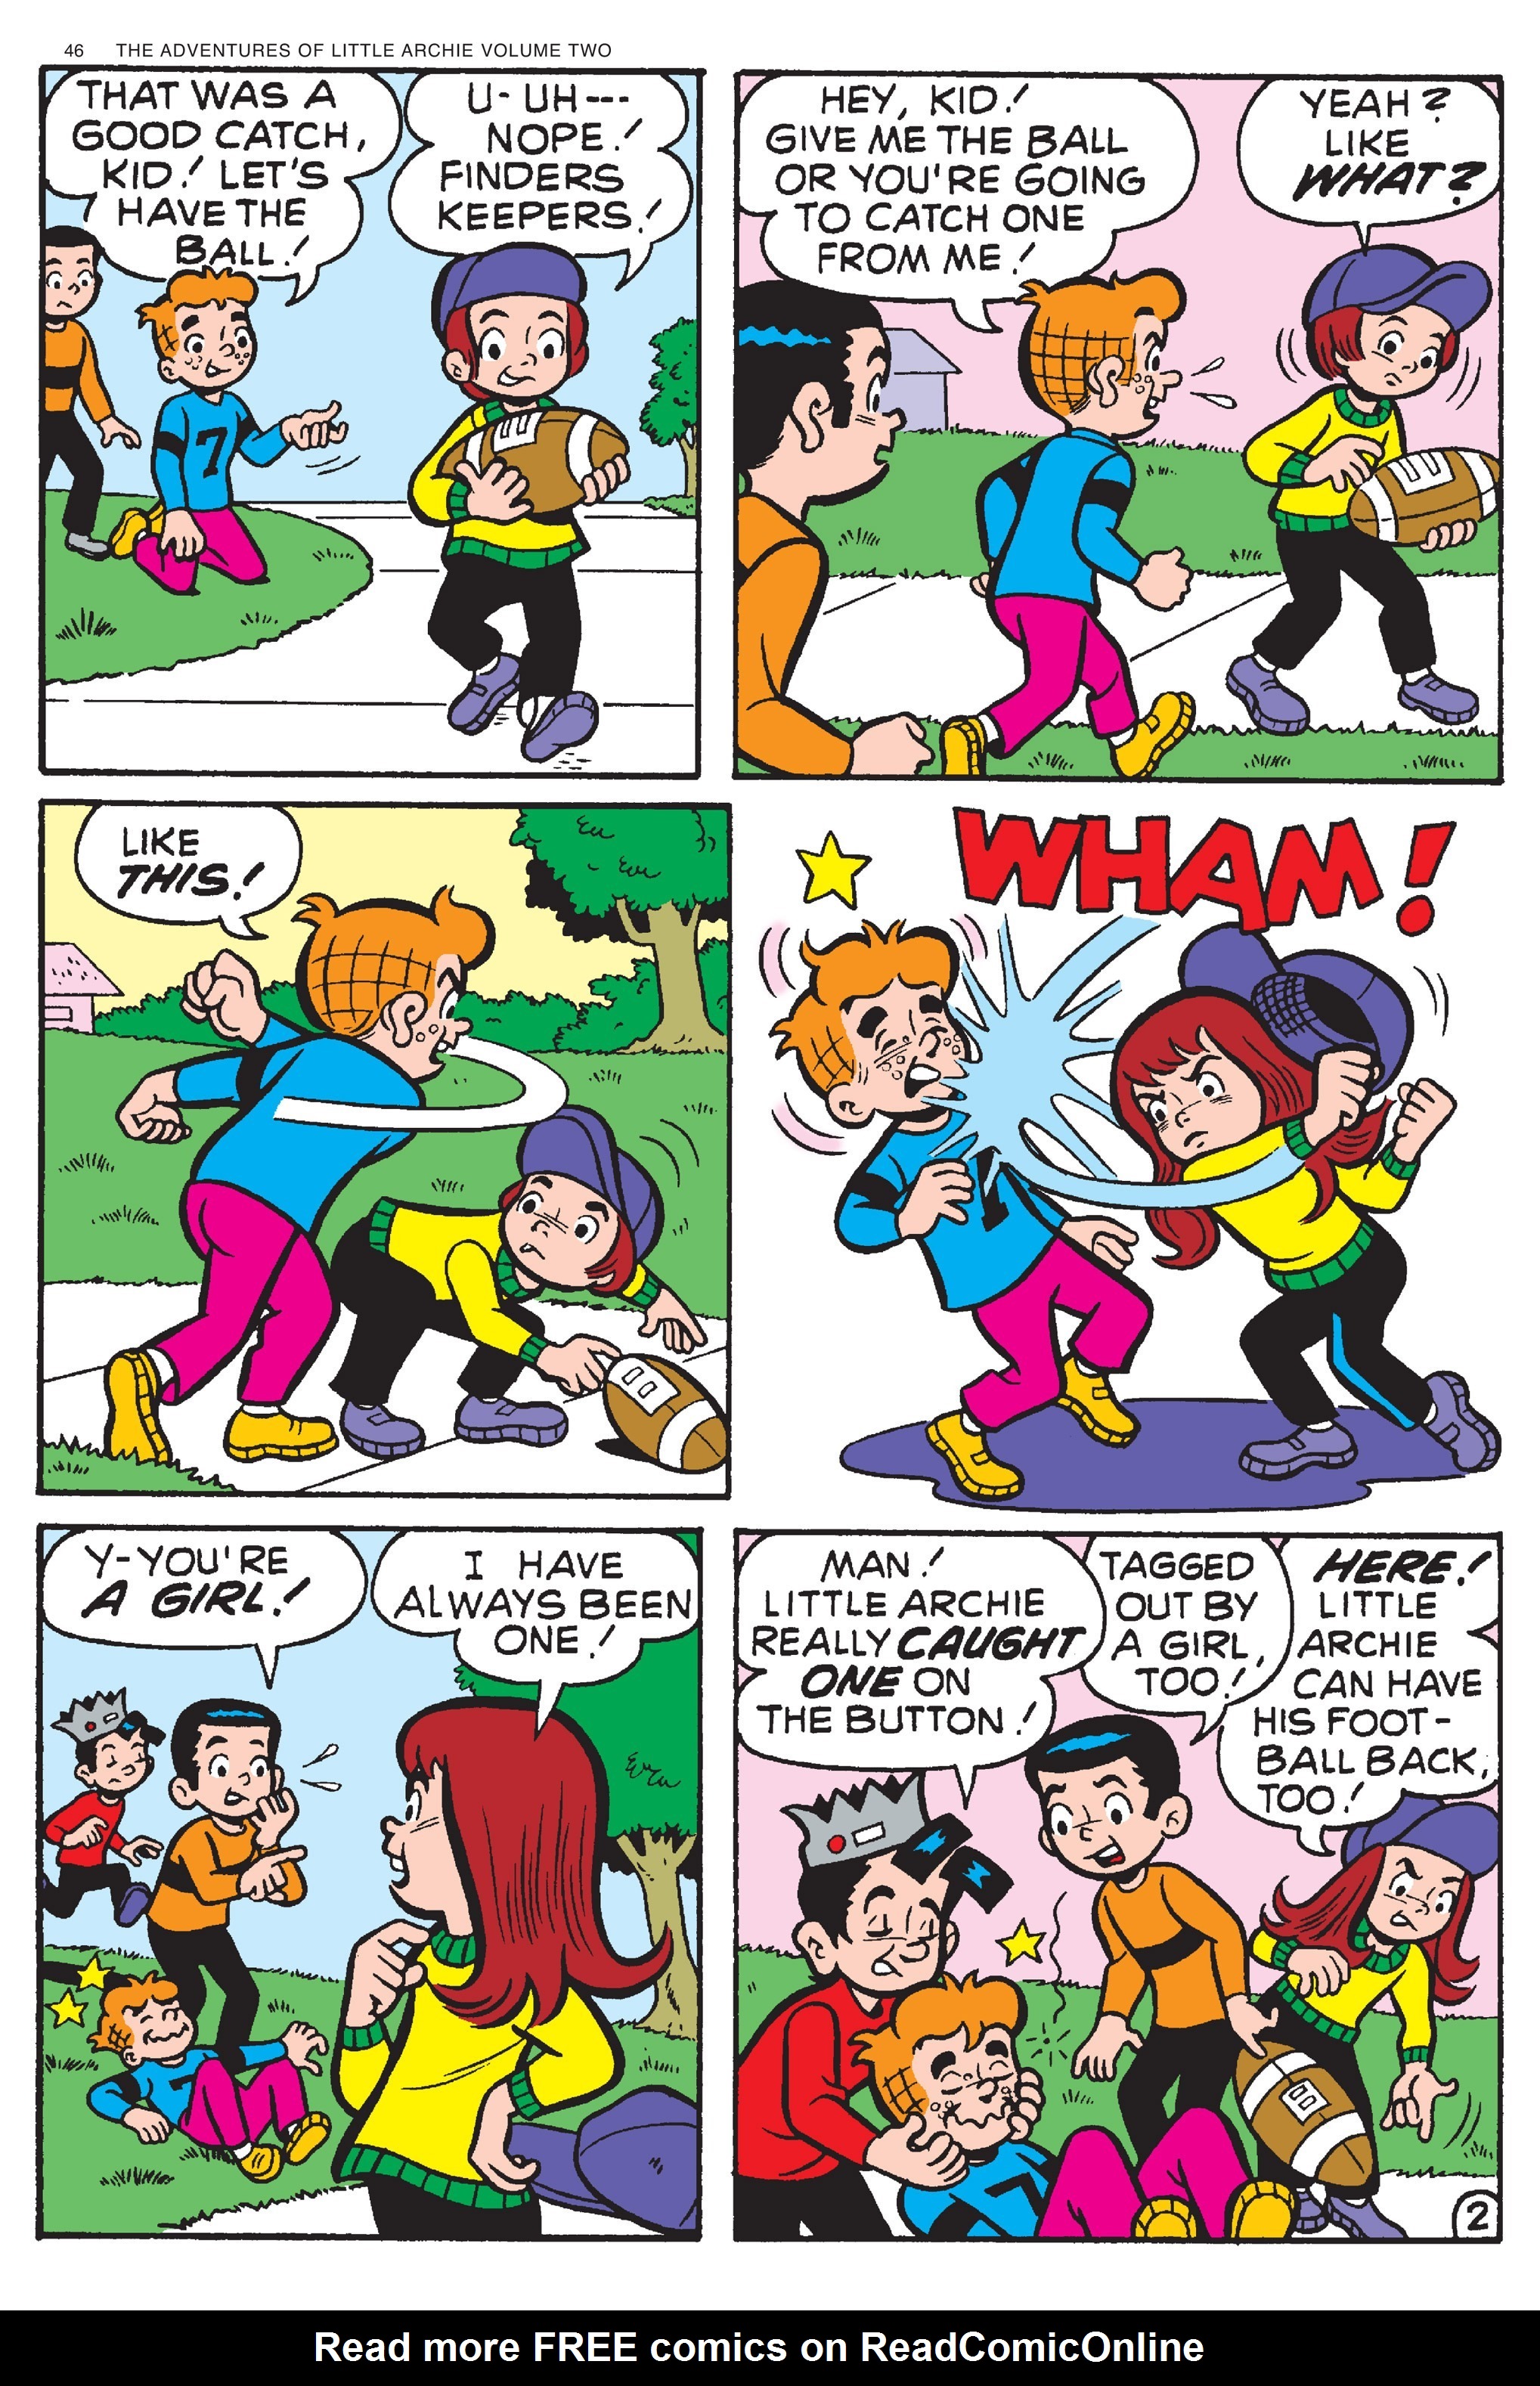 Read online Adventures of Little Archie comic -  Issue # TPB 2 - 47